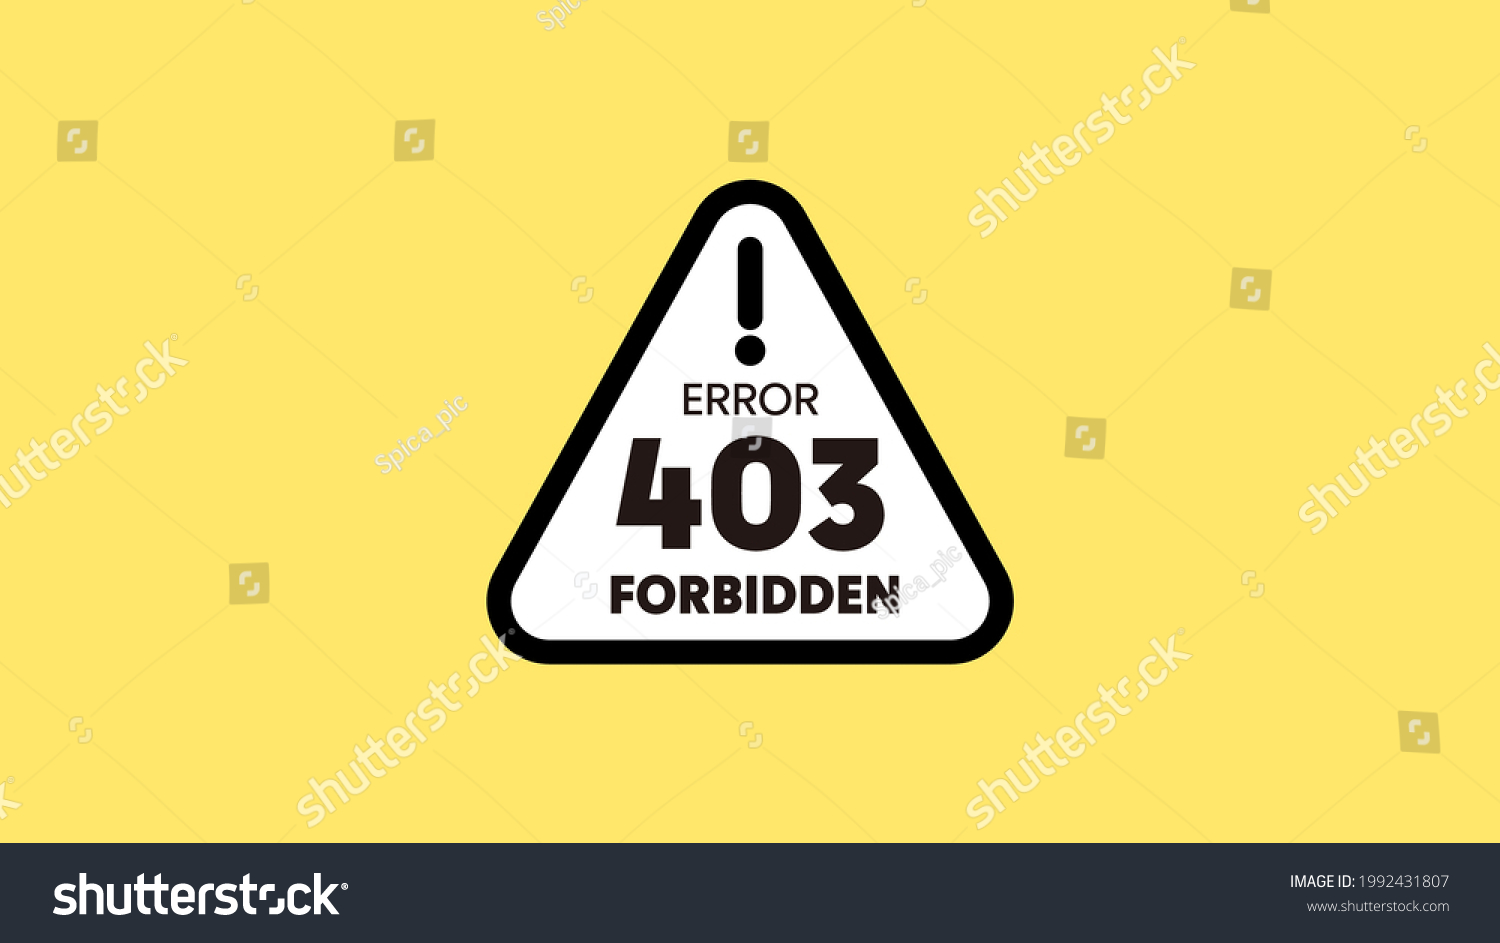 SVG of 403 Forbidden error HTTP status code on the website page.  Triangle CAUTION sign on yellow background. Good for HD movie, 16:9 ･1280×720 aspect ratio. svg